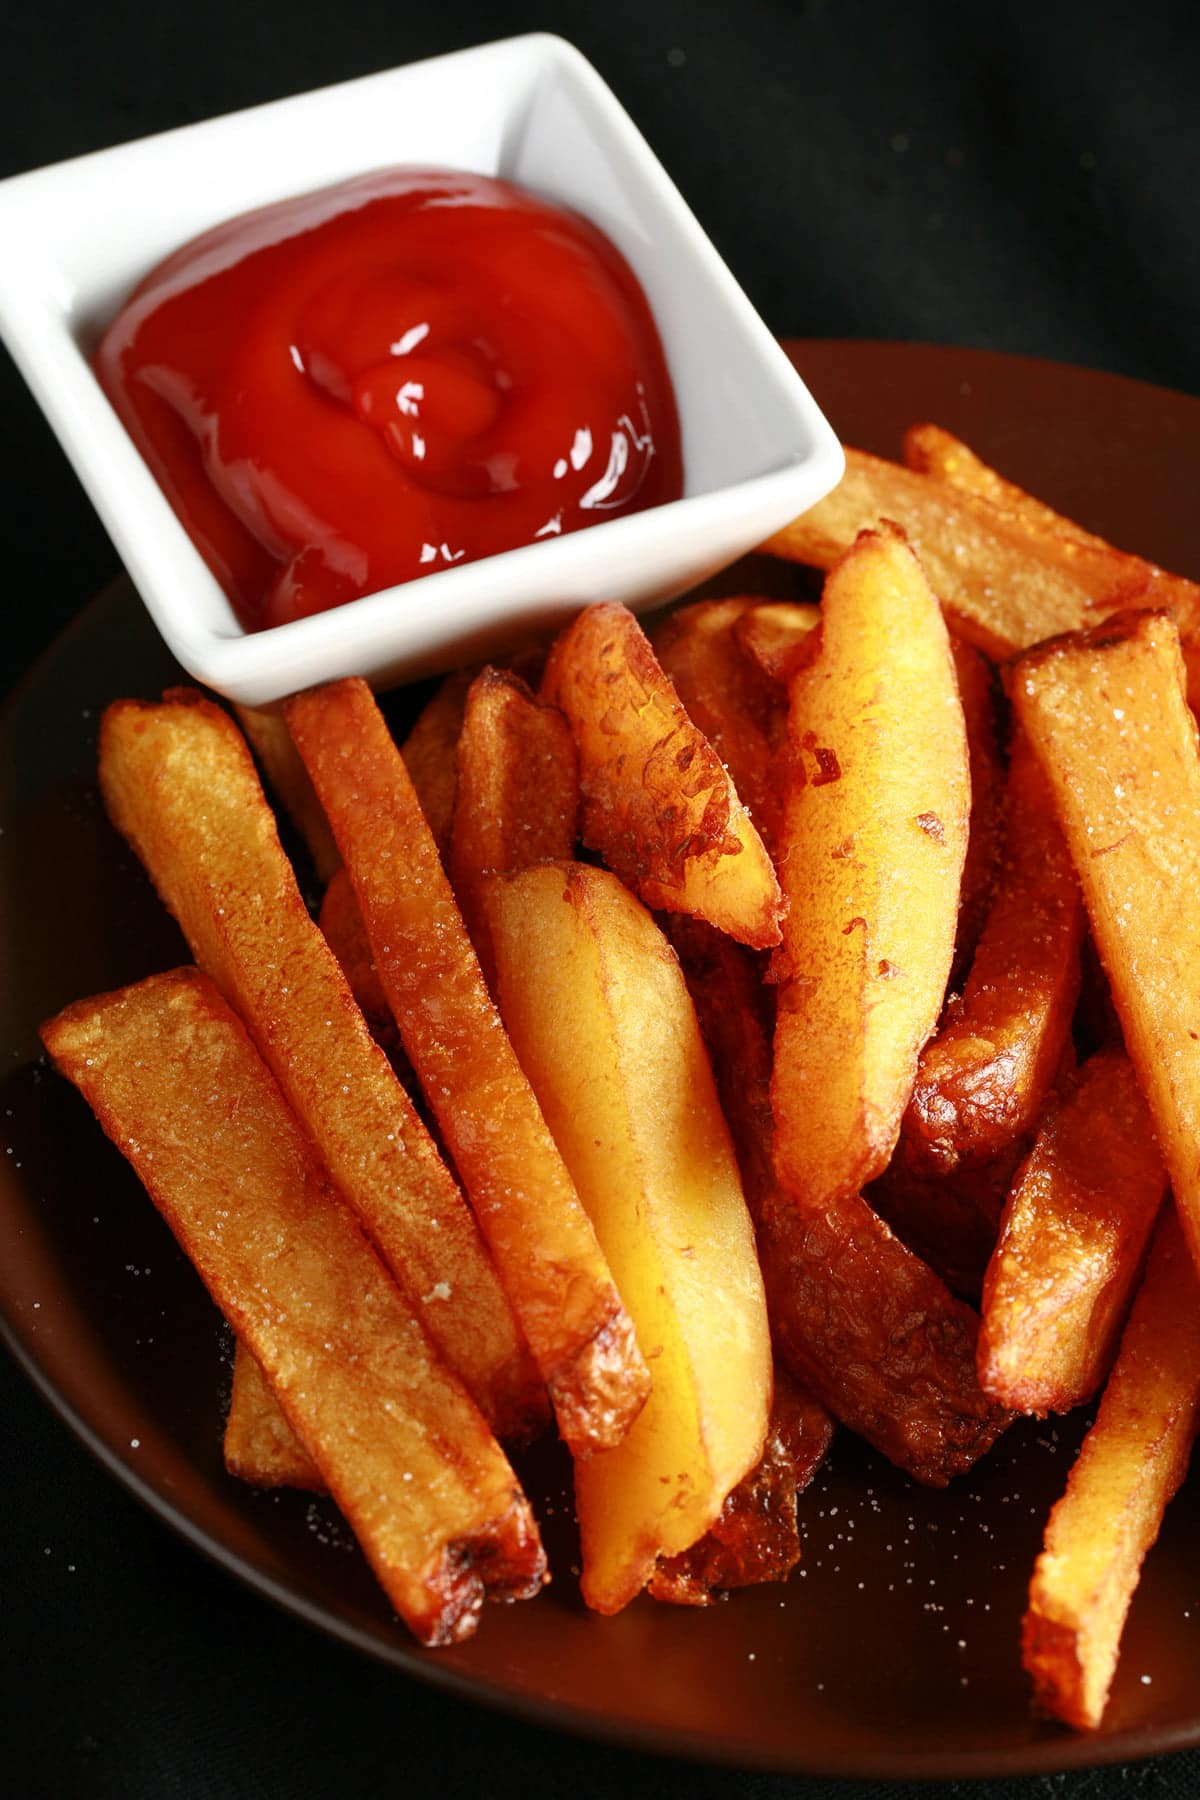 A plate of smoked french fries, with a small bowl of ketchup on the side.